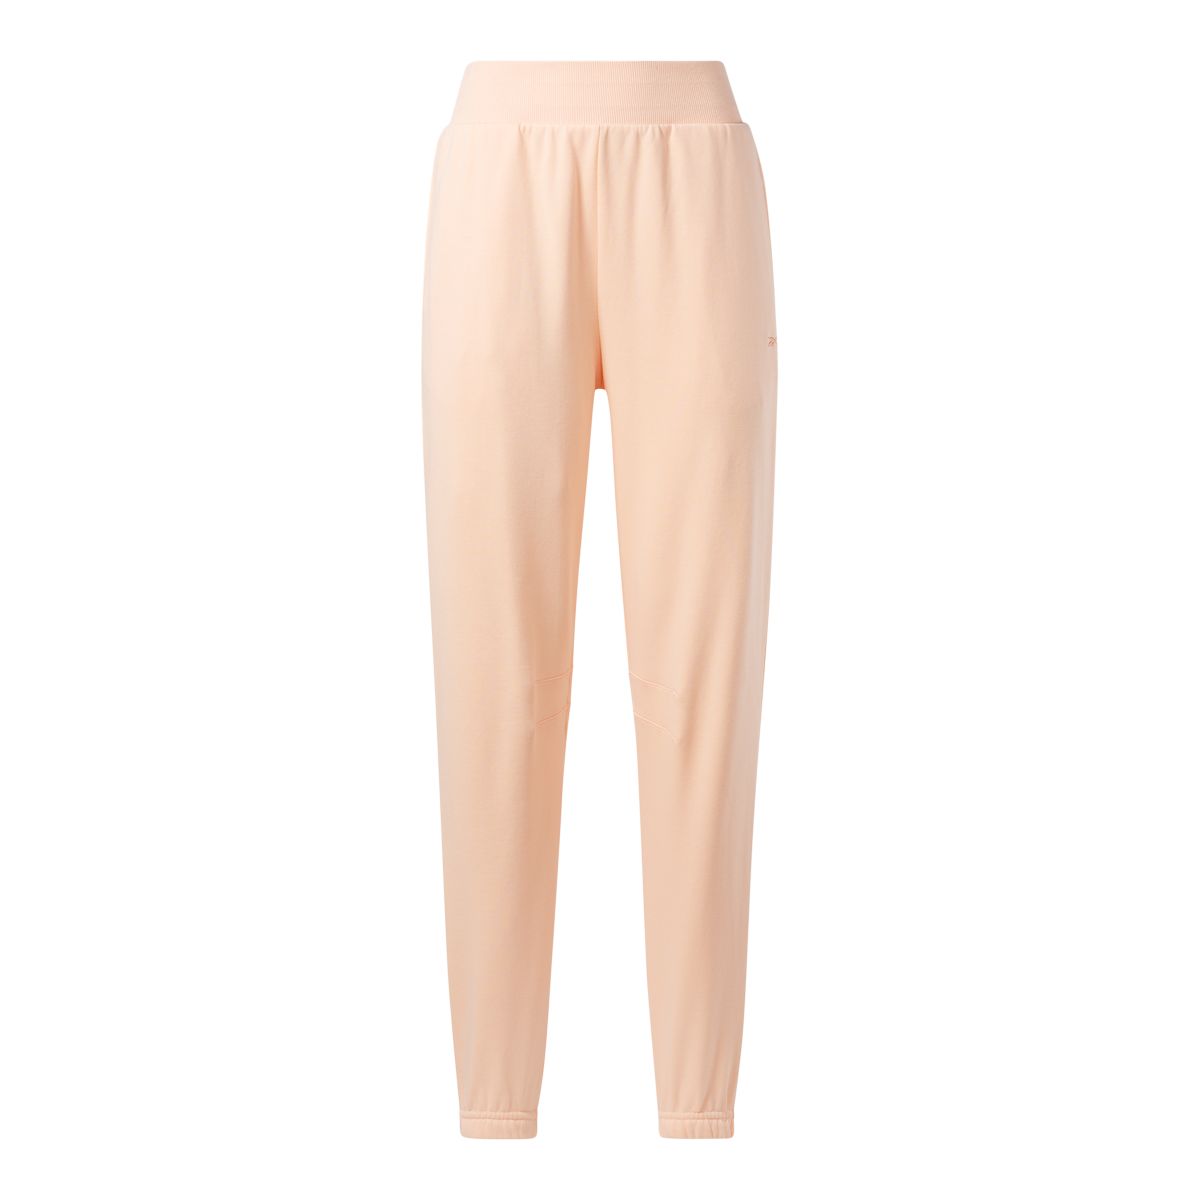 Reebok Women's Classics Wide Cotton French Terry Jogger Pants